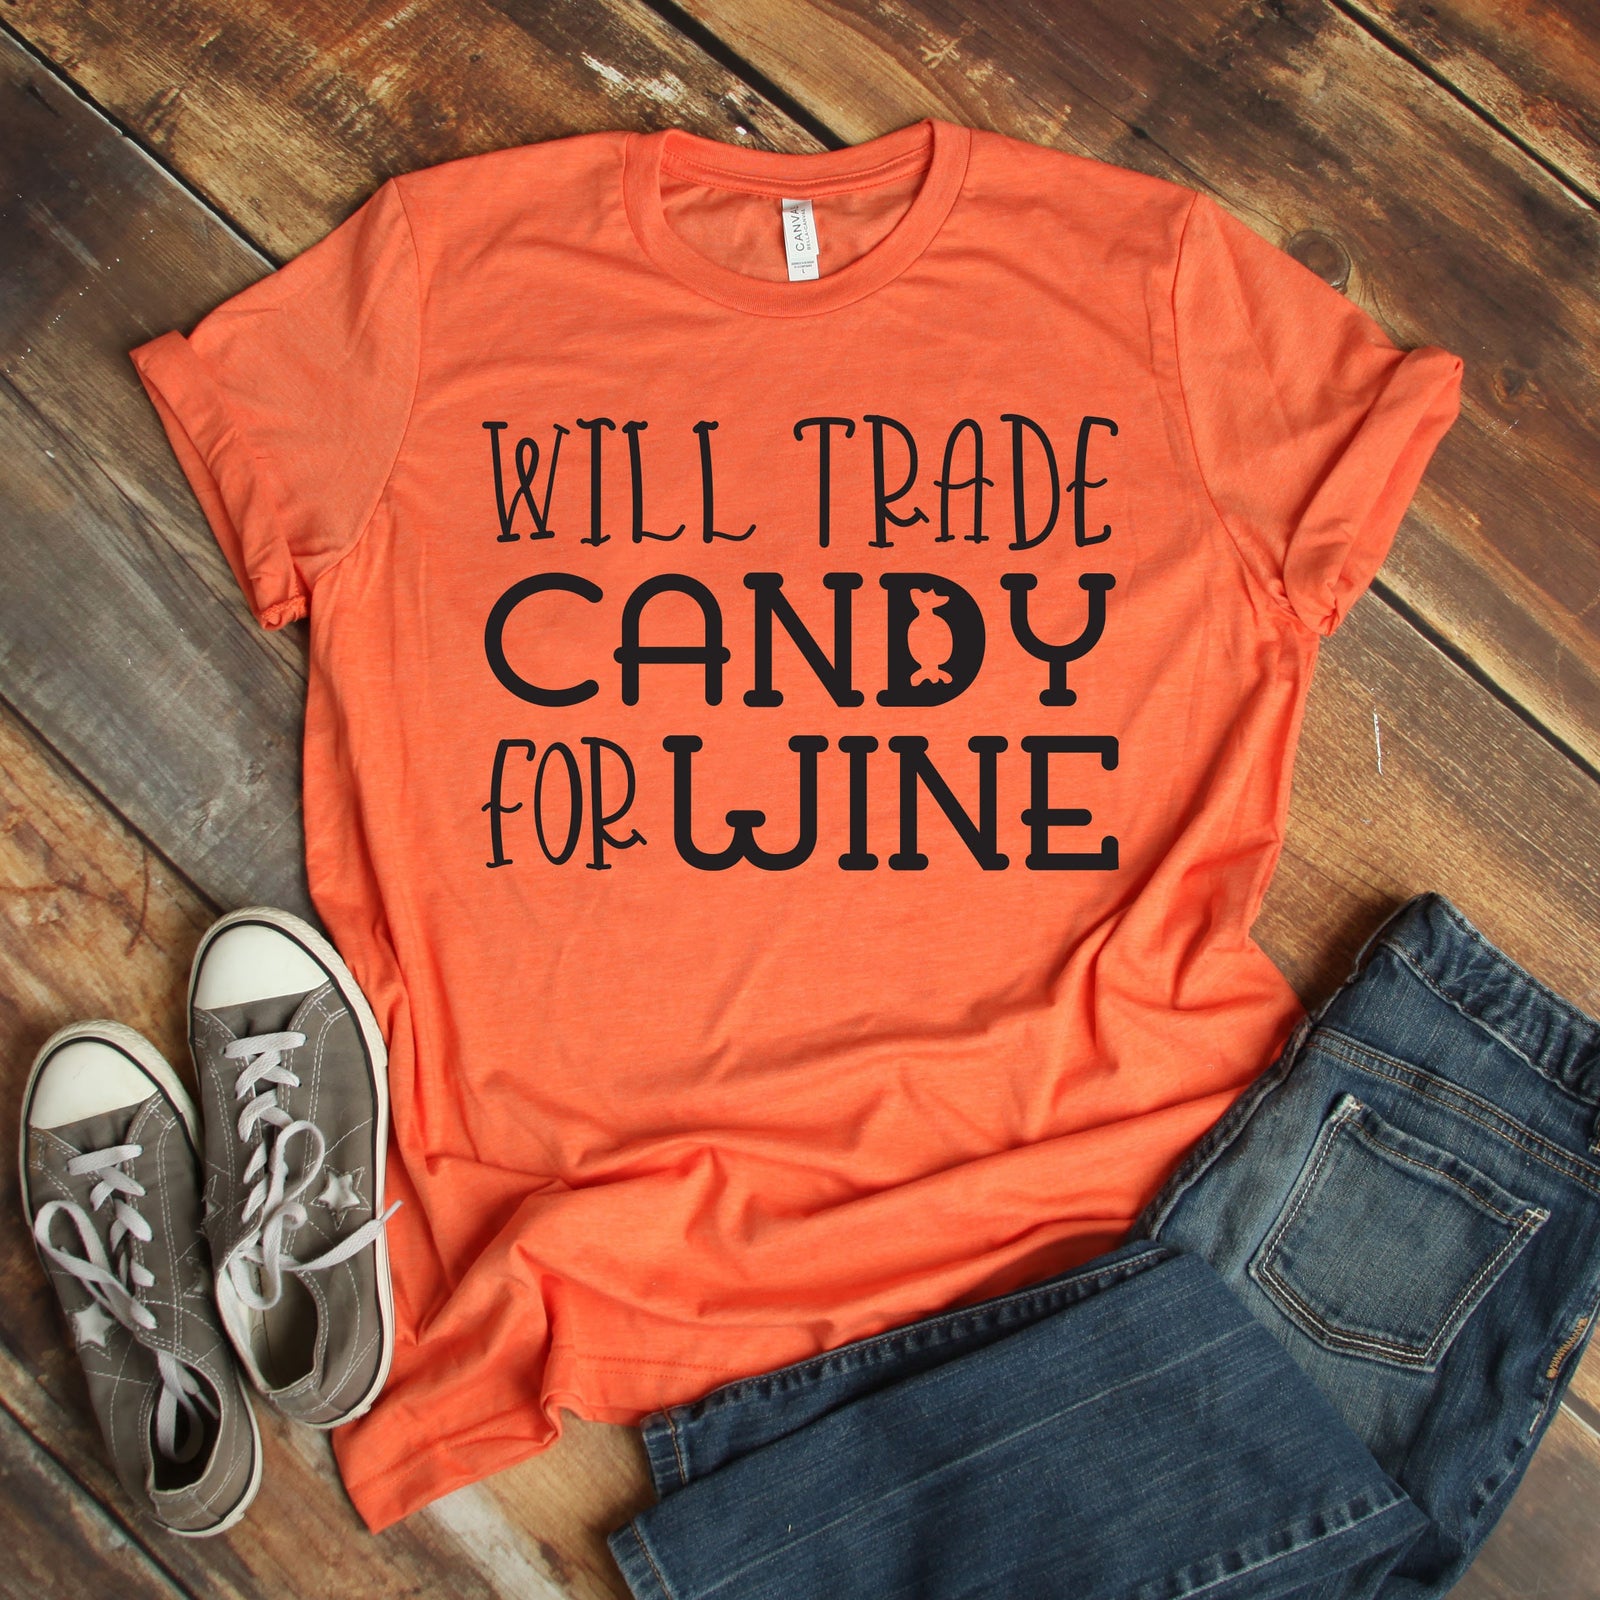 Will Trade Candy for Wine - Happy Halloween Adult T Shirt - Halloween - Funny T Shirt